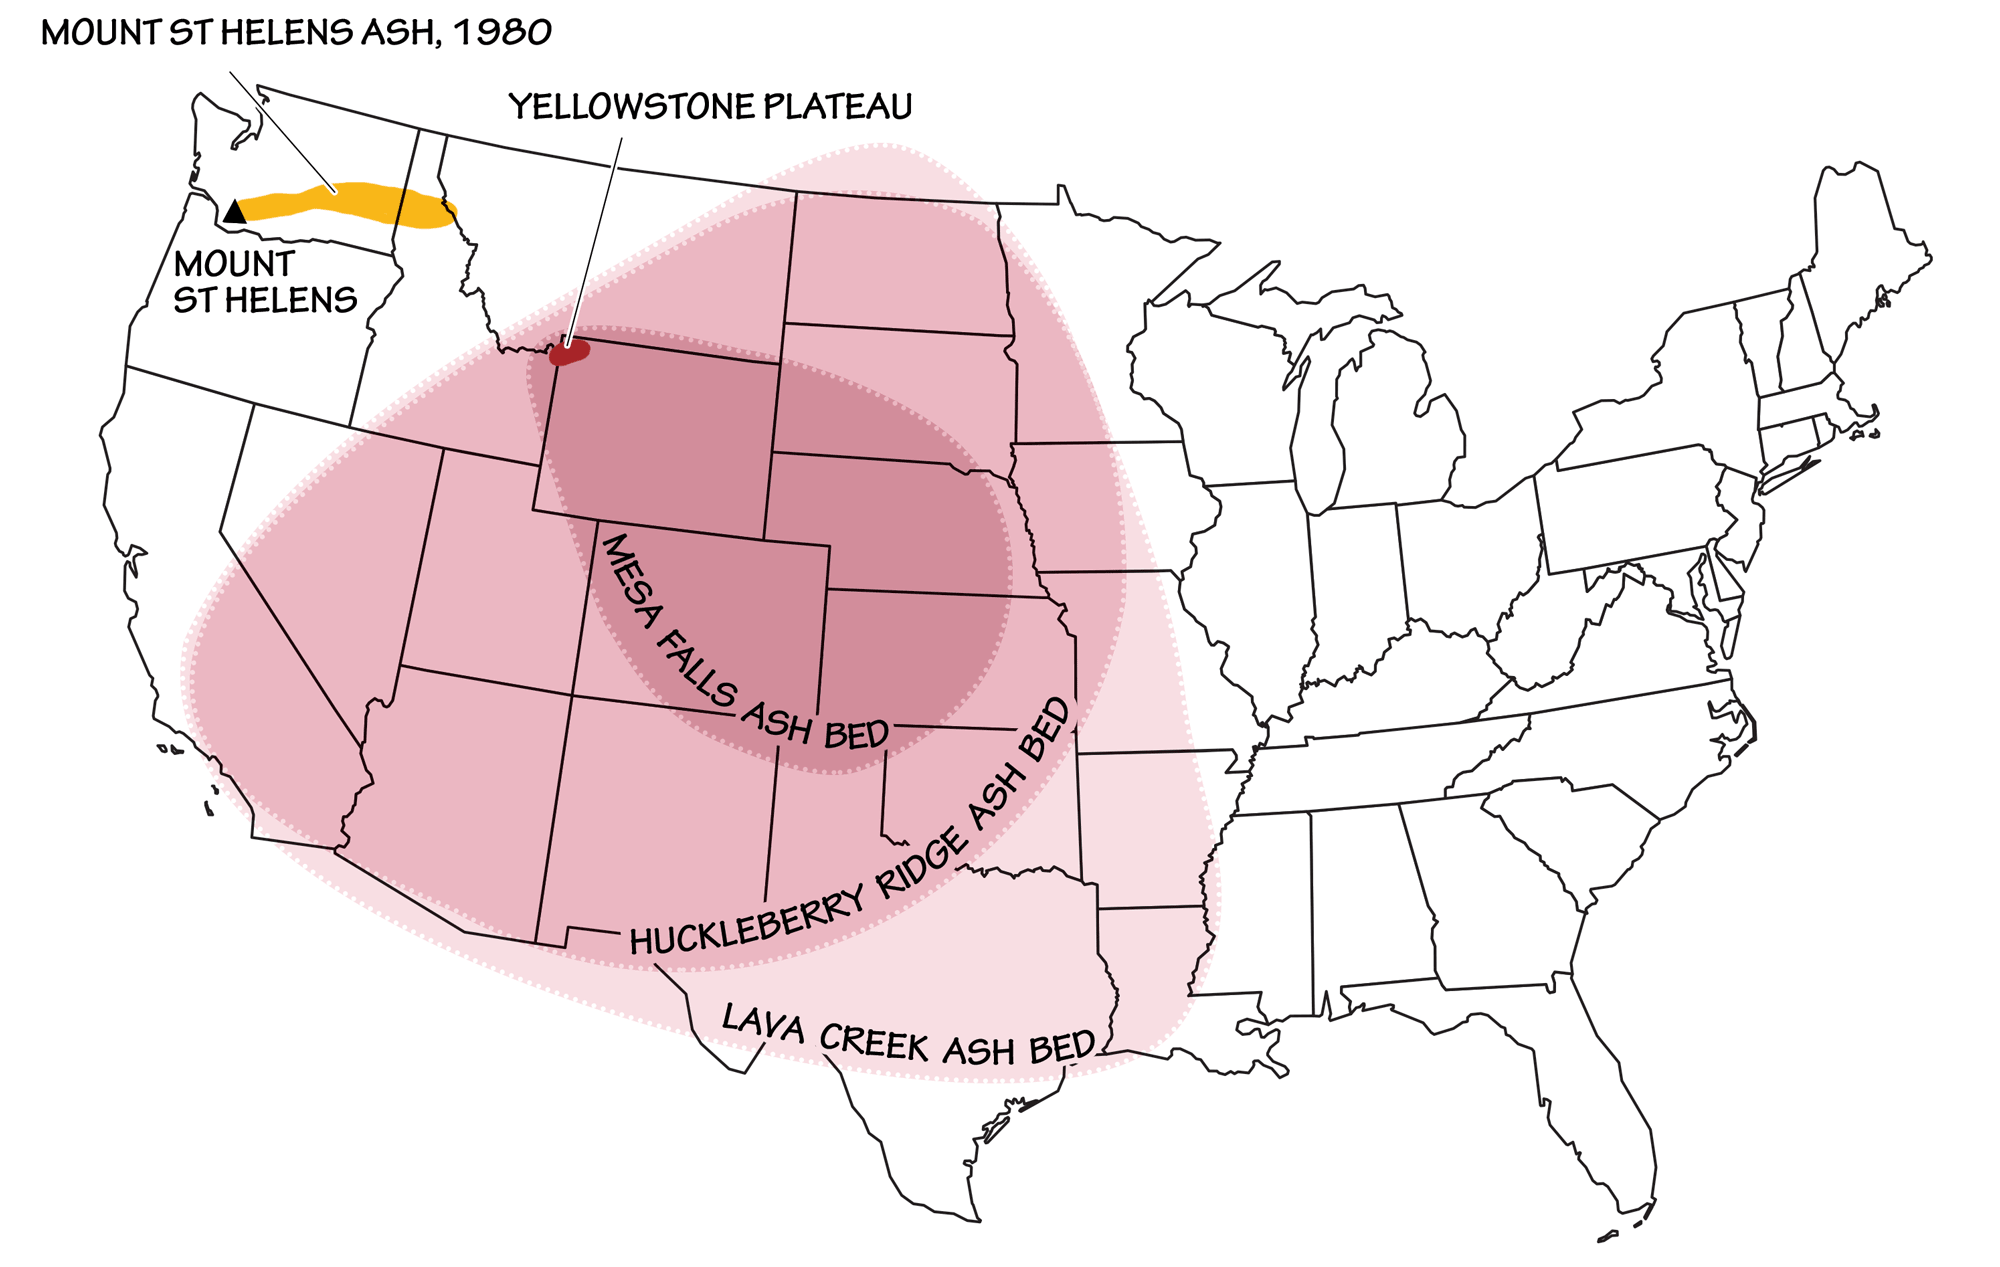 Map showing the extent of ashfalls from Yellowstone supervolcano eruptions.